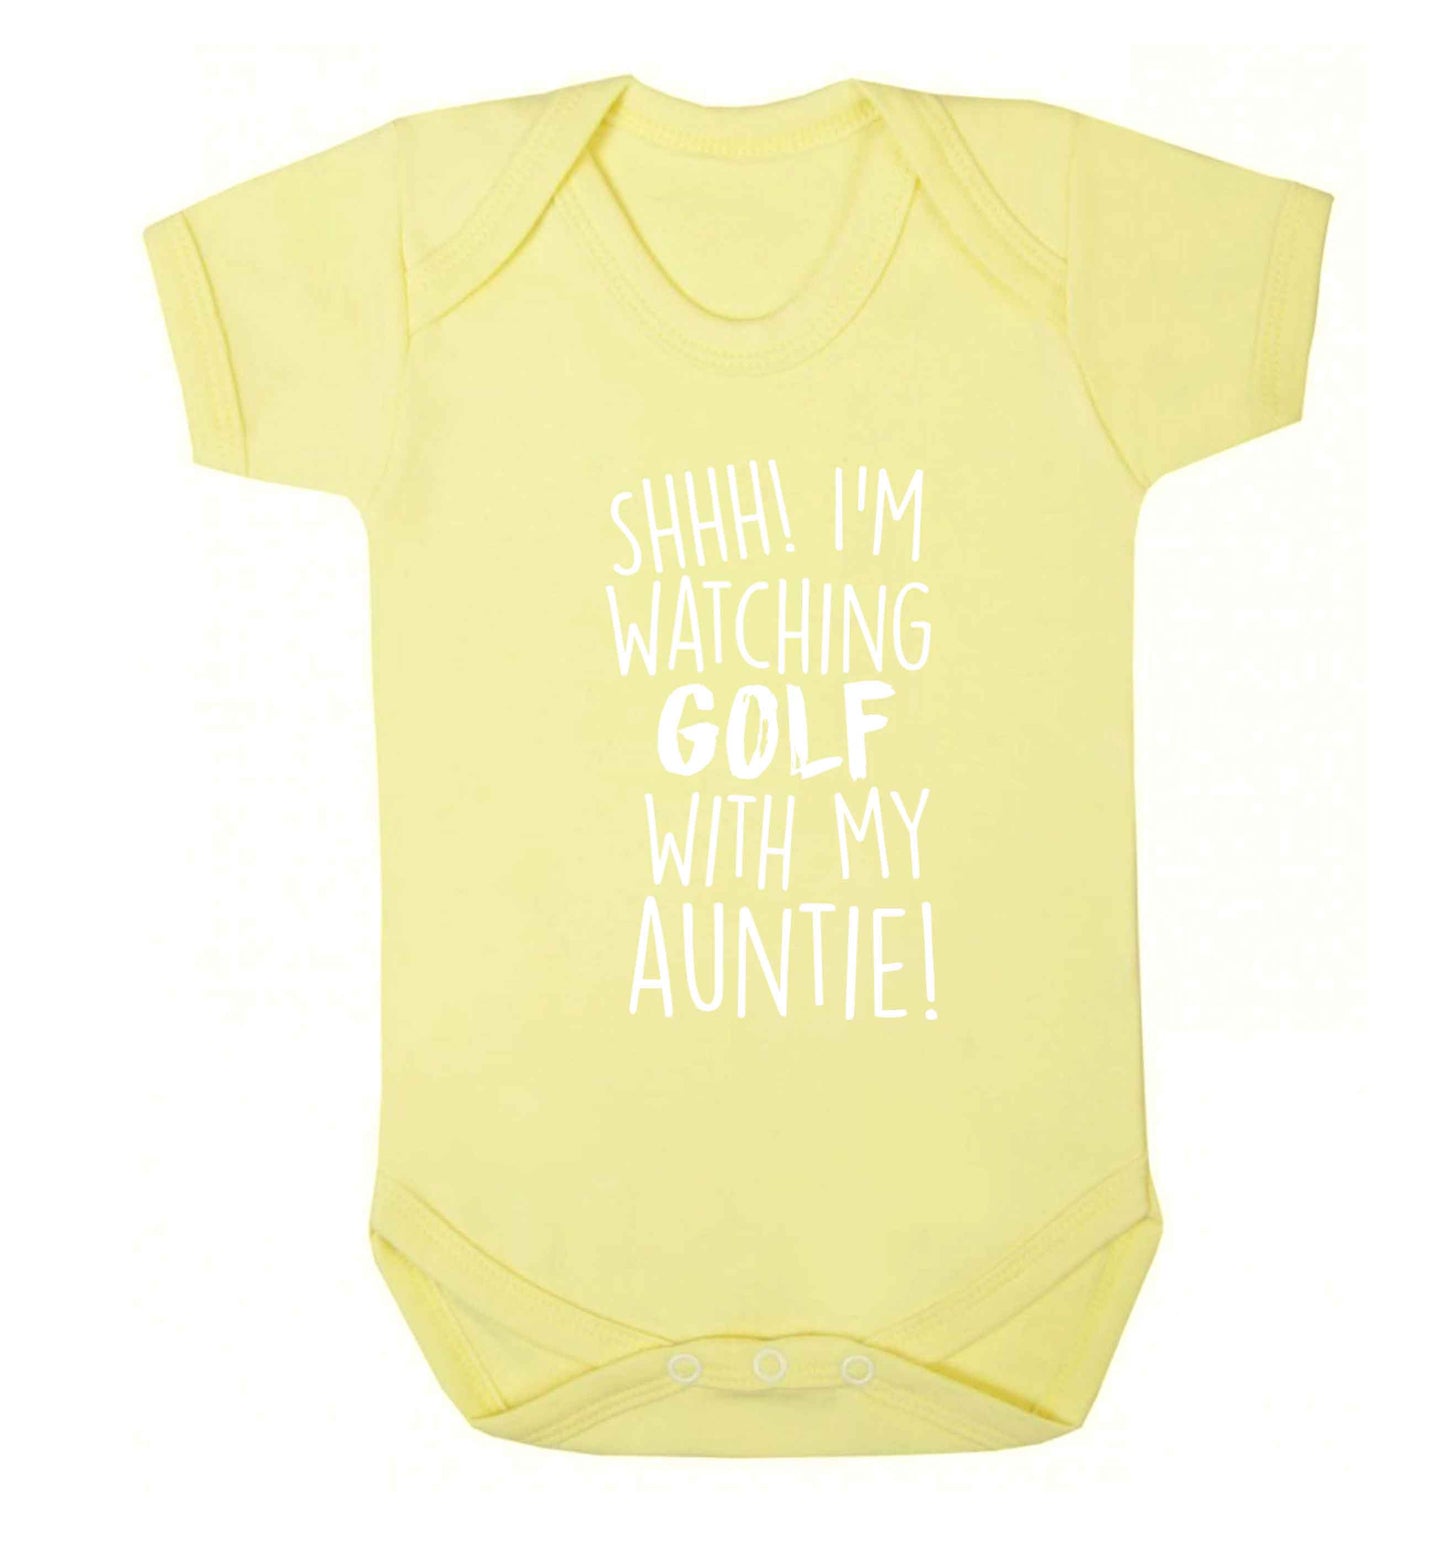 Shh I'm watching golf with my auntie Baby Vest pale yellow 18-24 months